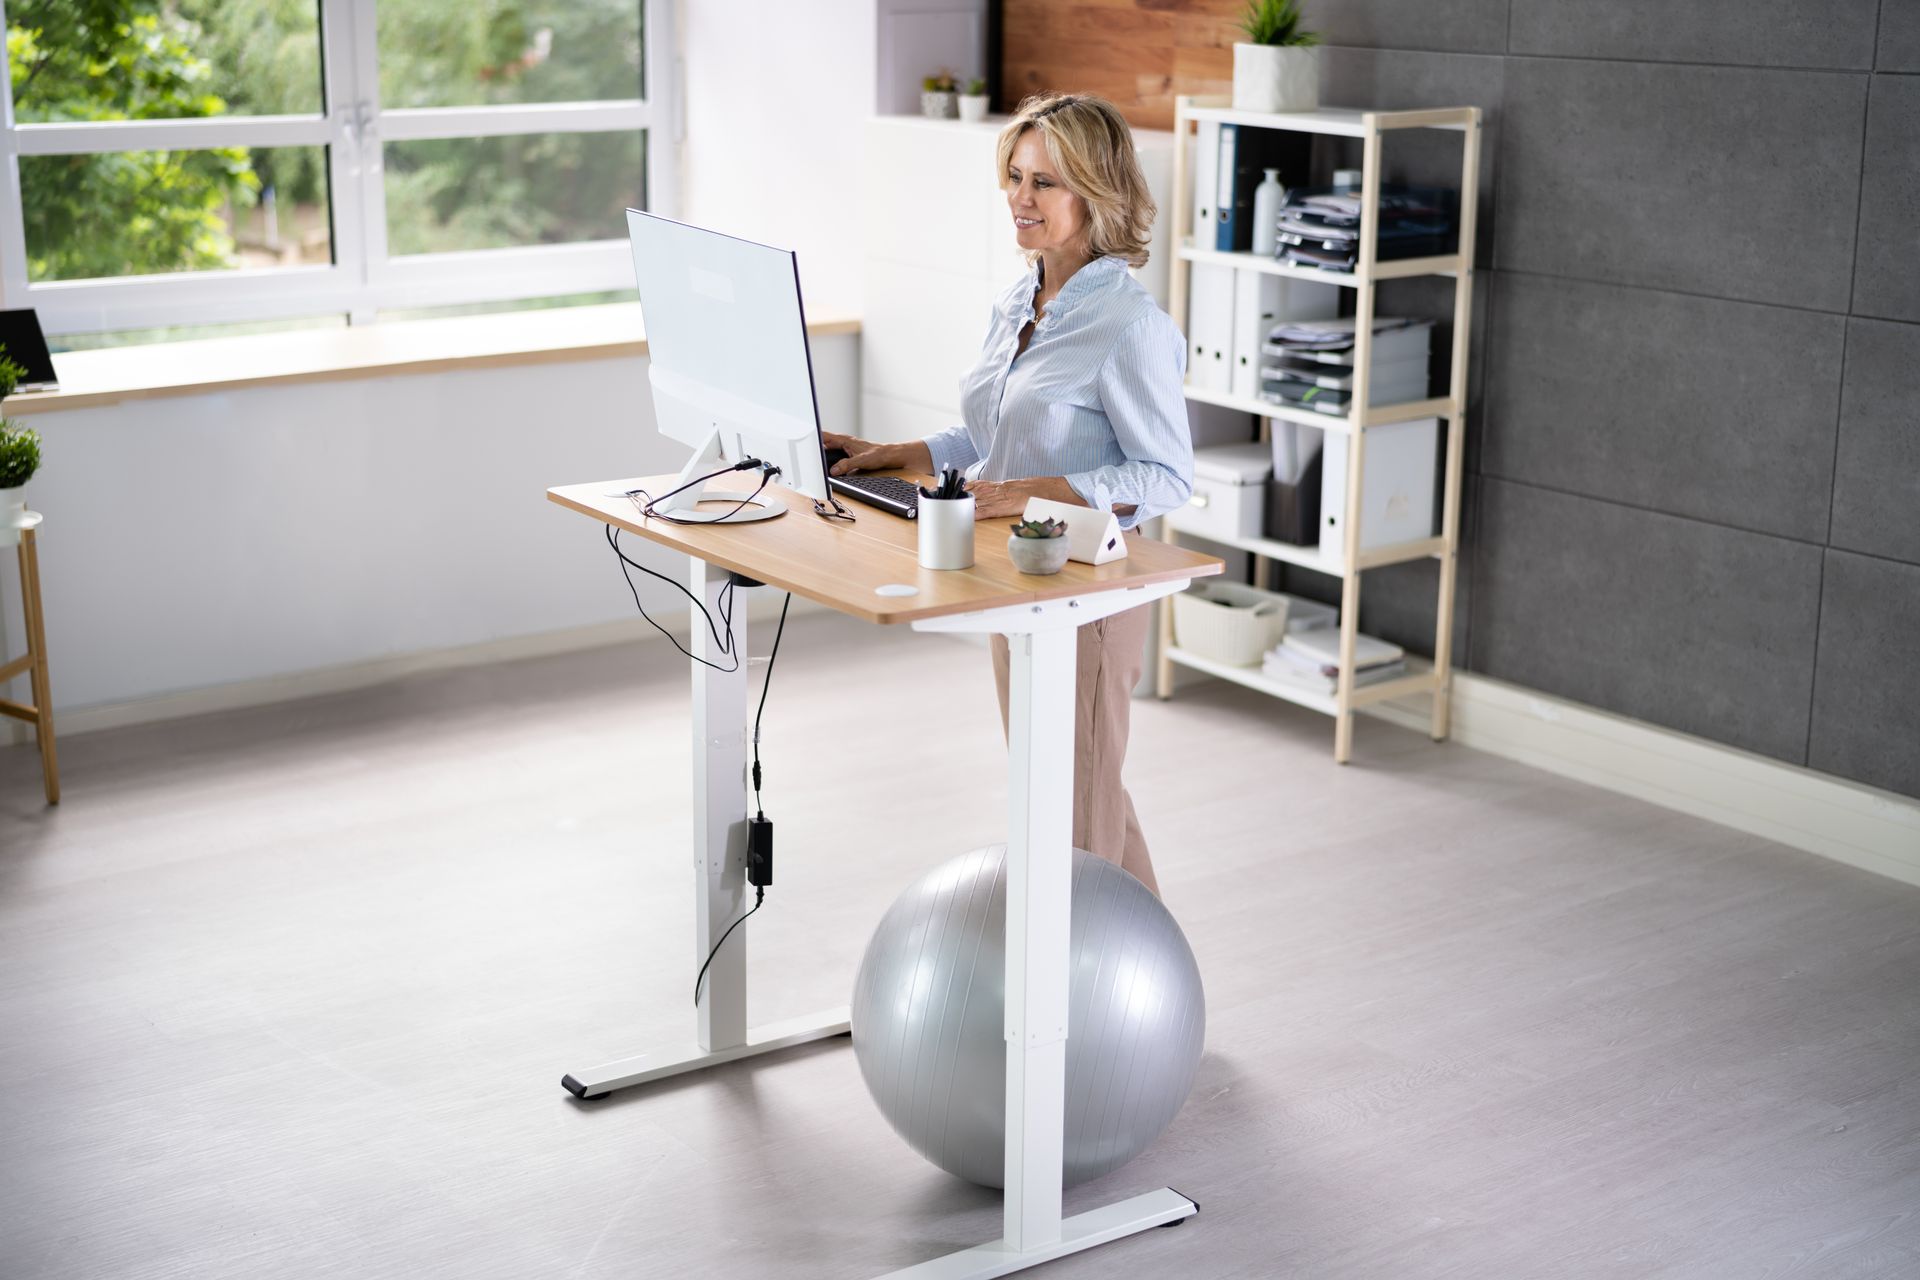 A woman is using a standing desk to provide variety in her work-from-home office allowing her to find pain relief